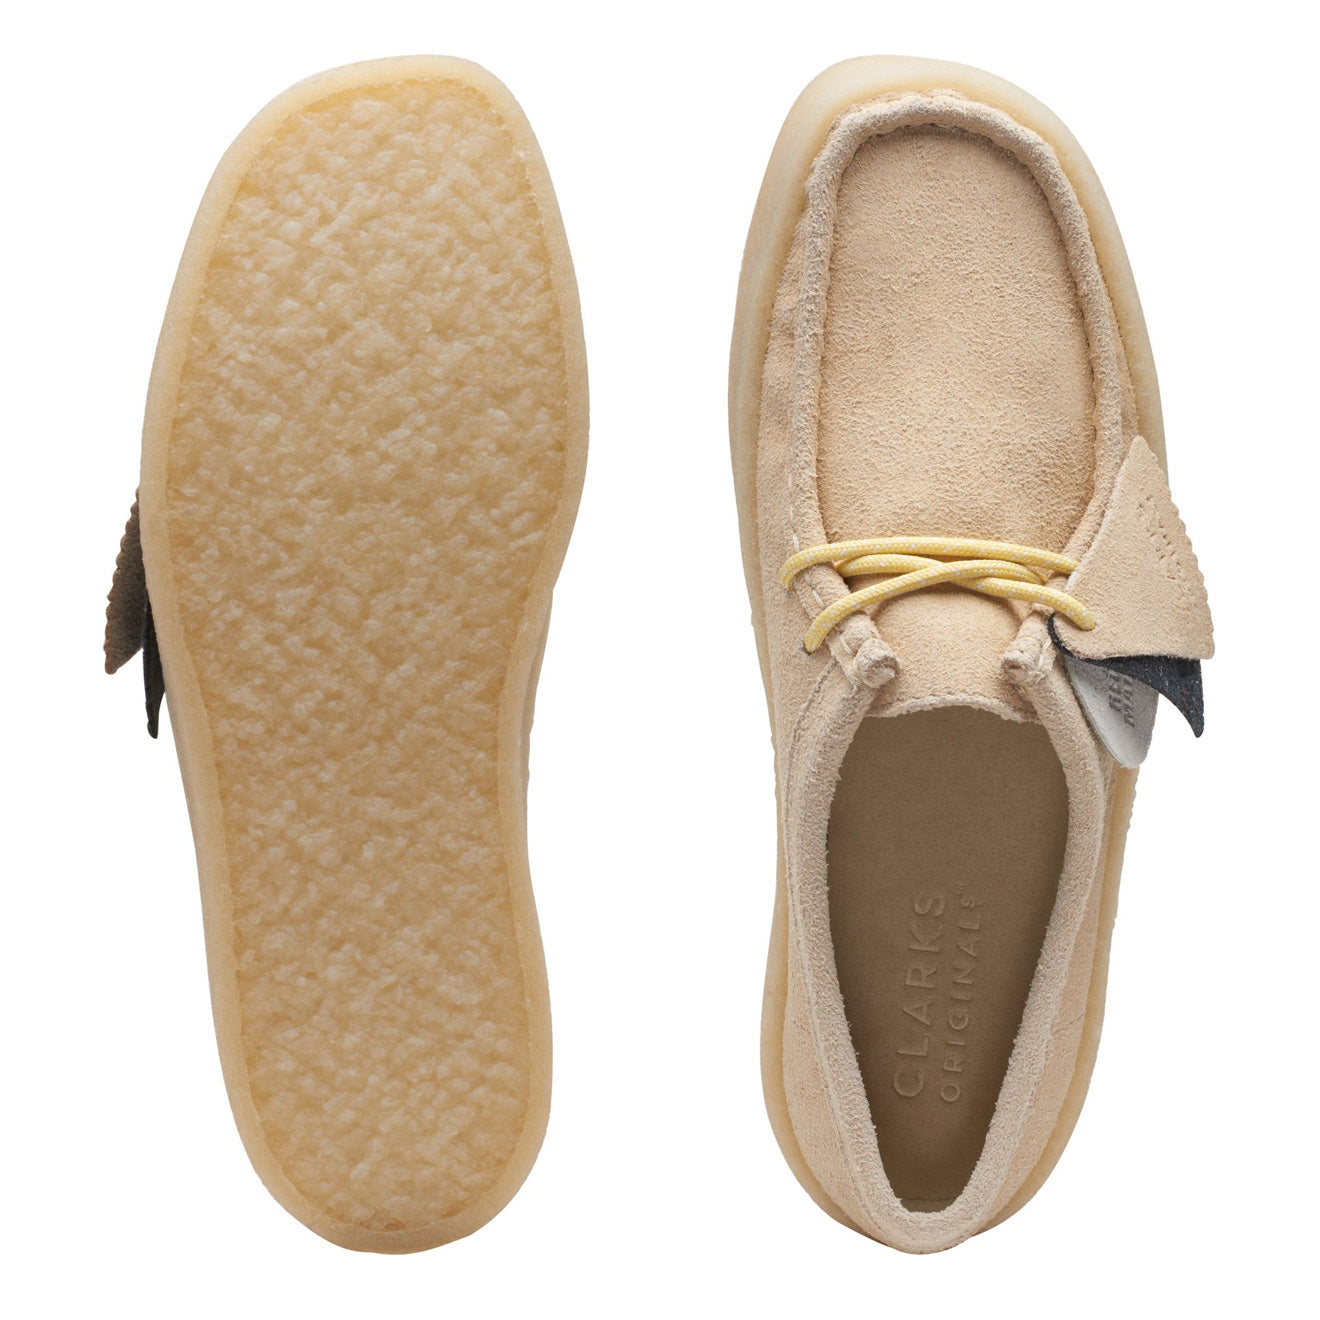 Clarks Originals Womens Wallabee Cup Shoe Maple | The Sporting Lodge